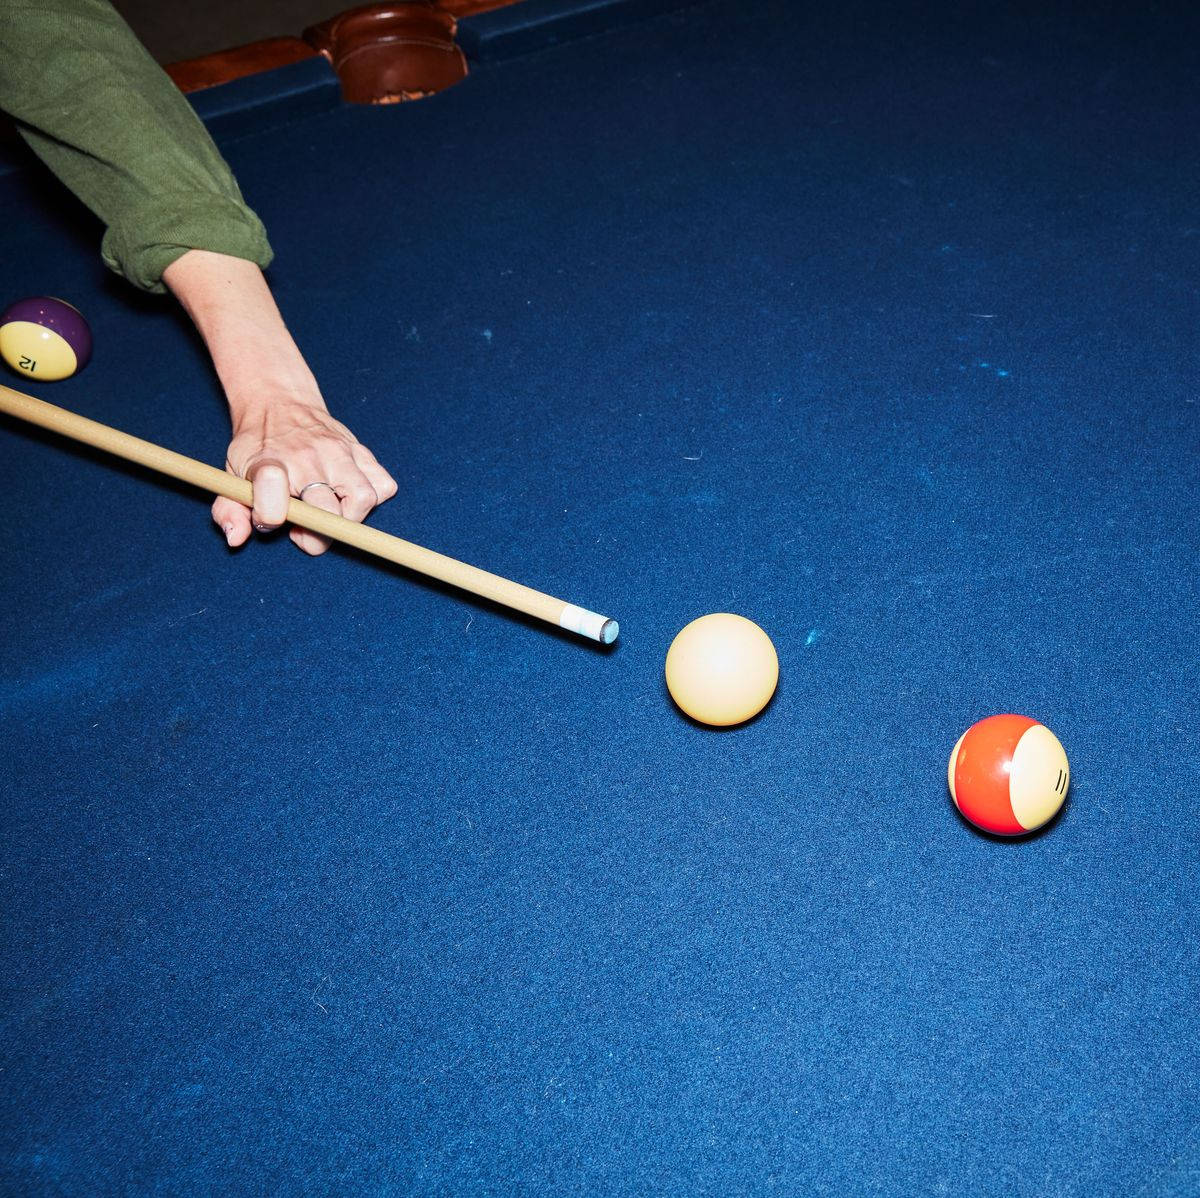 Billiards Cue Ball Targeting Another Ball Wallpaper